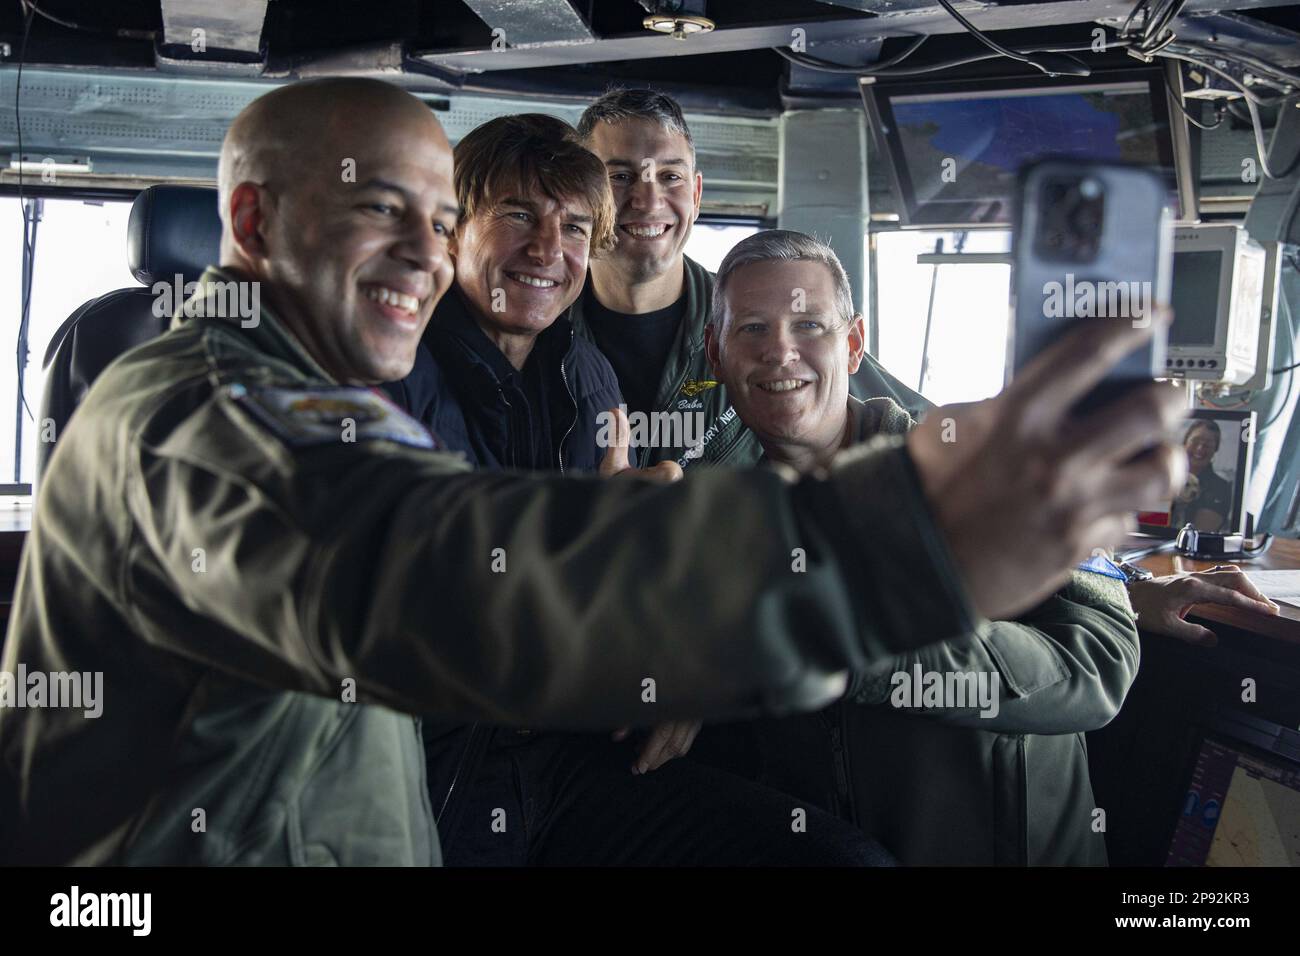 Command Master Chief Nick Wallace, left, takes a selfie with Tom Cruise, center left, Executive Officer, Capt. Gregory Nery, center right, and Commanding Officer, Capt. Dave Pollard, aboard the Nimitz-class aircraft carrier USS George H.W. Bush, during a visit to the ship, on March 3, 2023, while filming scenes for 'Mission: Impossible - Dead Reckoning Part Two.' The George H.W. Bush Carrier Strike Group is on a scheduled deployment in the U.S. Naval Forces Europe area of operations, employed by U.S. Sixth Fleet to defend U.S., allied and partner interests. Photo by MC3 Samuel Wagner/U.S. Navy Stock Photo